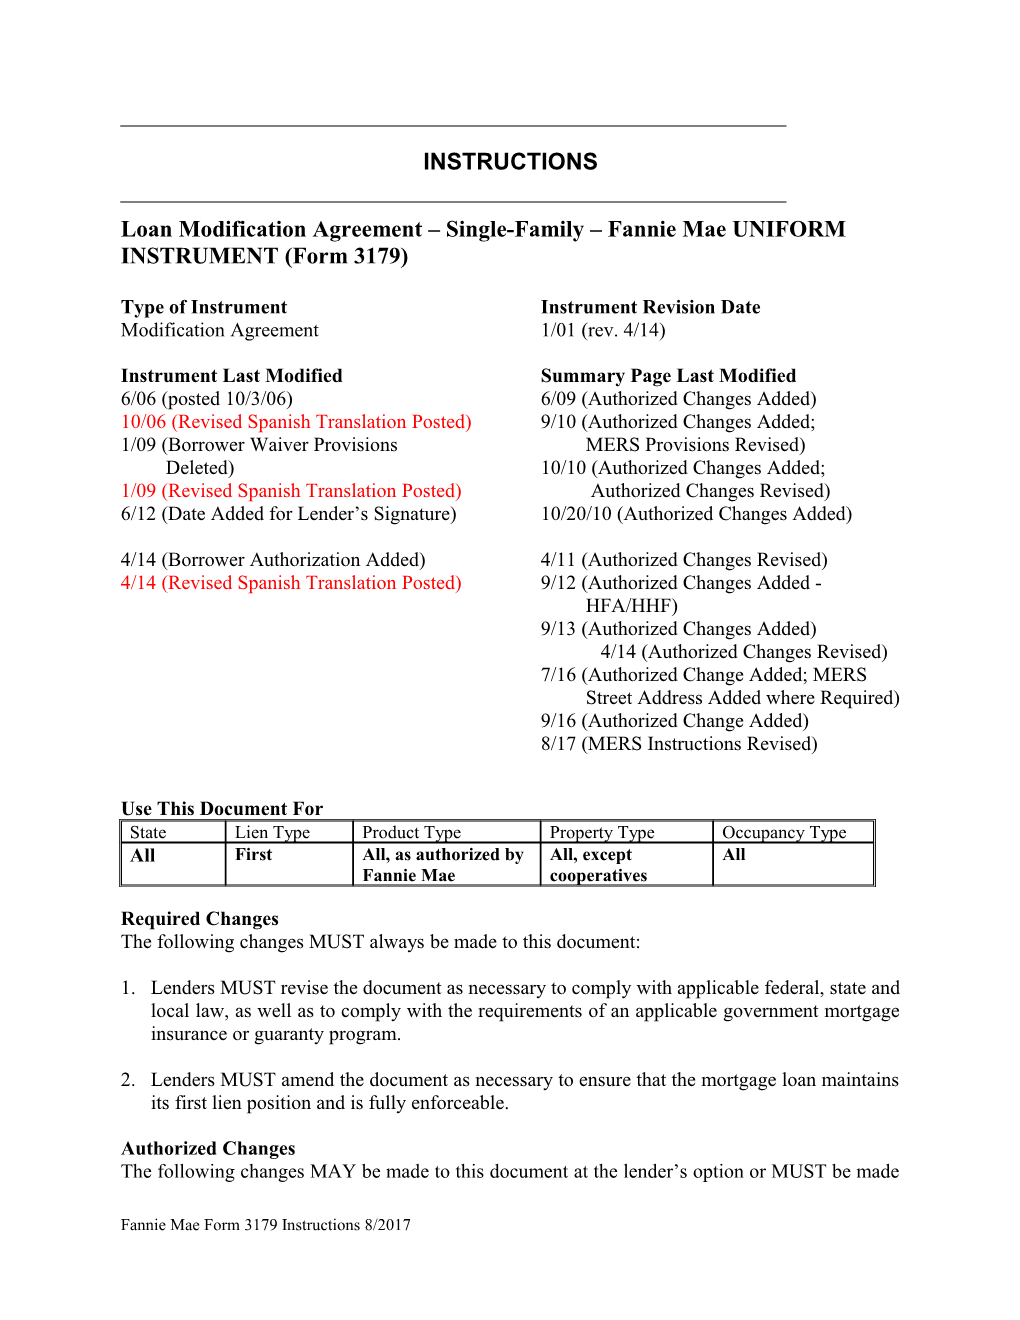 Loan Modification Agreement (Form 3179): Word